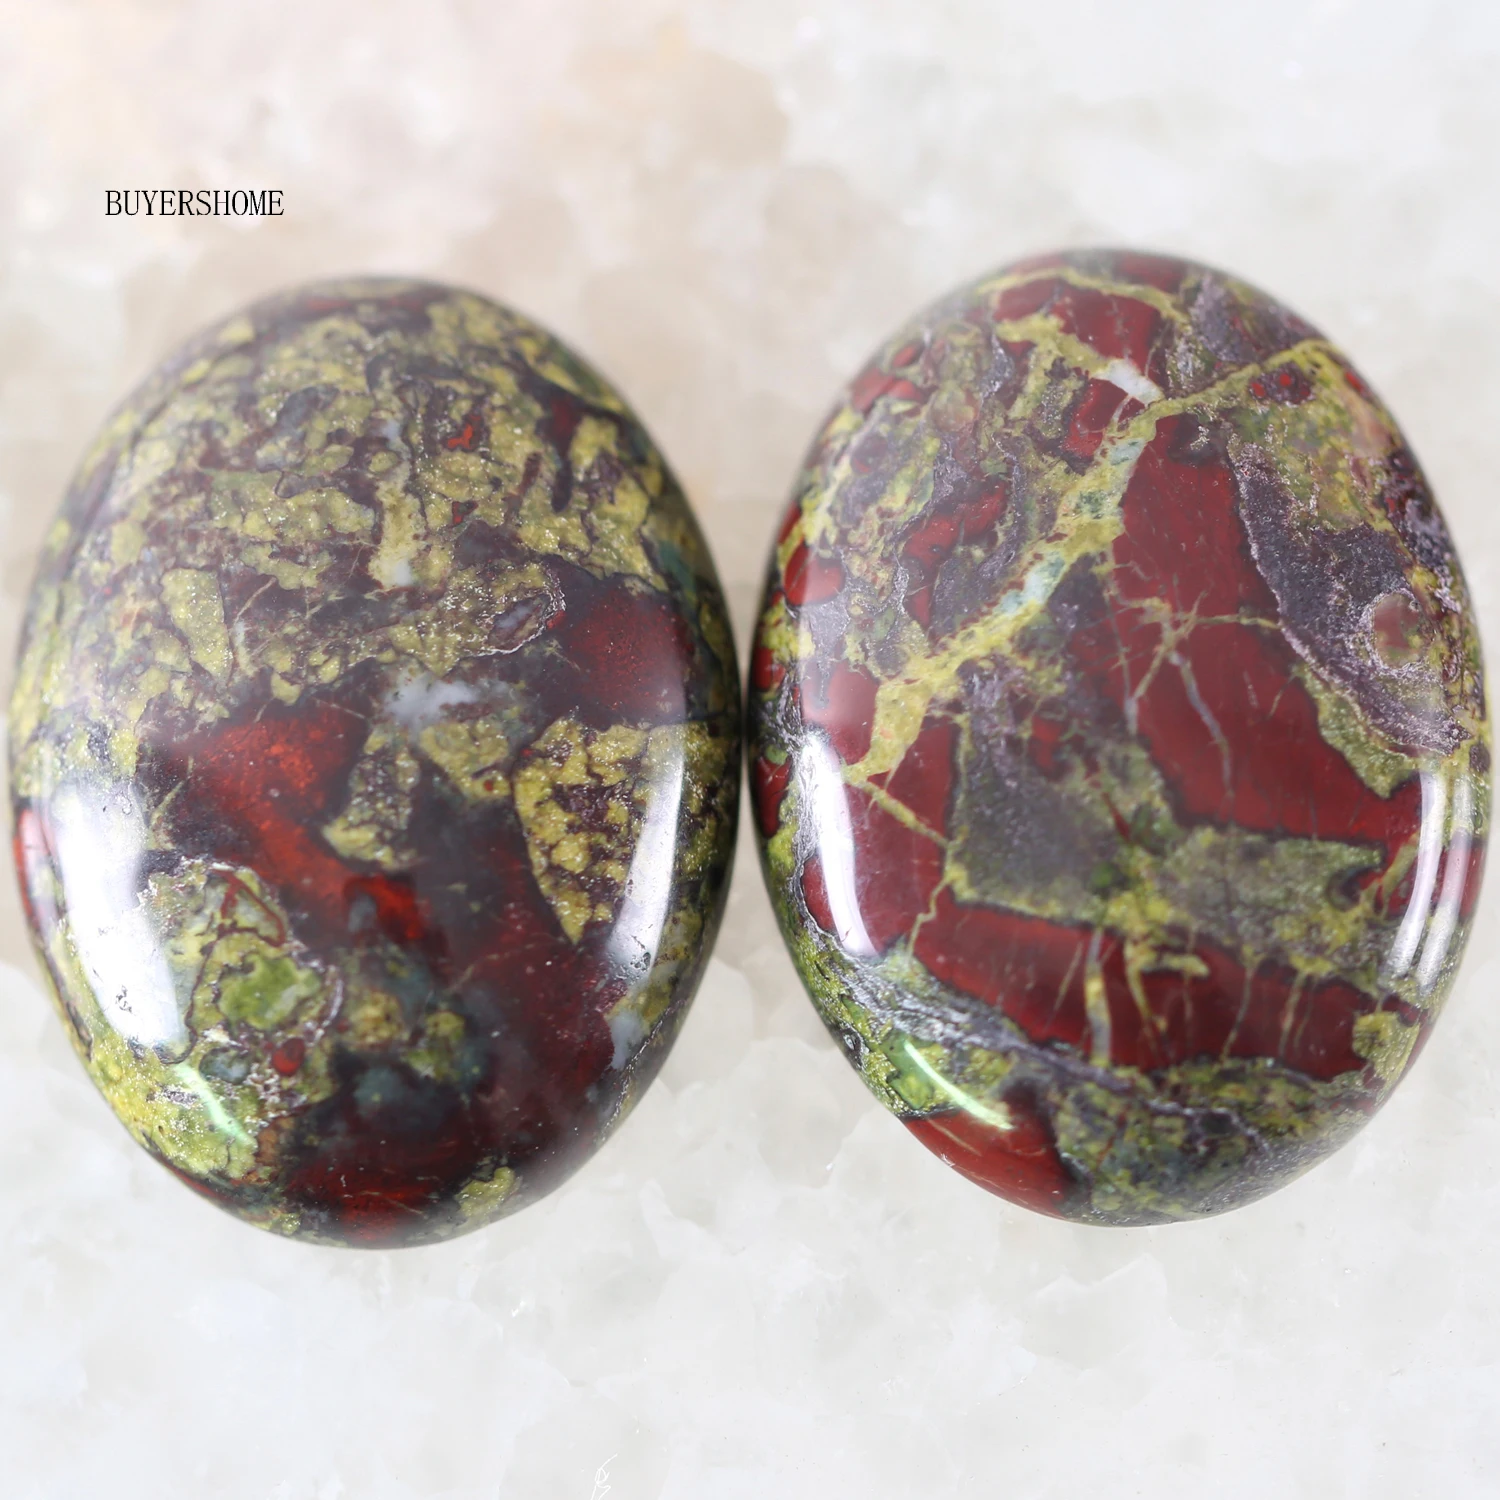 2Pcs/Lot 22x30MM Oval Natural Stone Bead Dragon Blood Stone CAB Cabochon For Jewelry Making DIY Bracelet Necklace K524